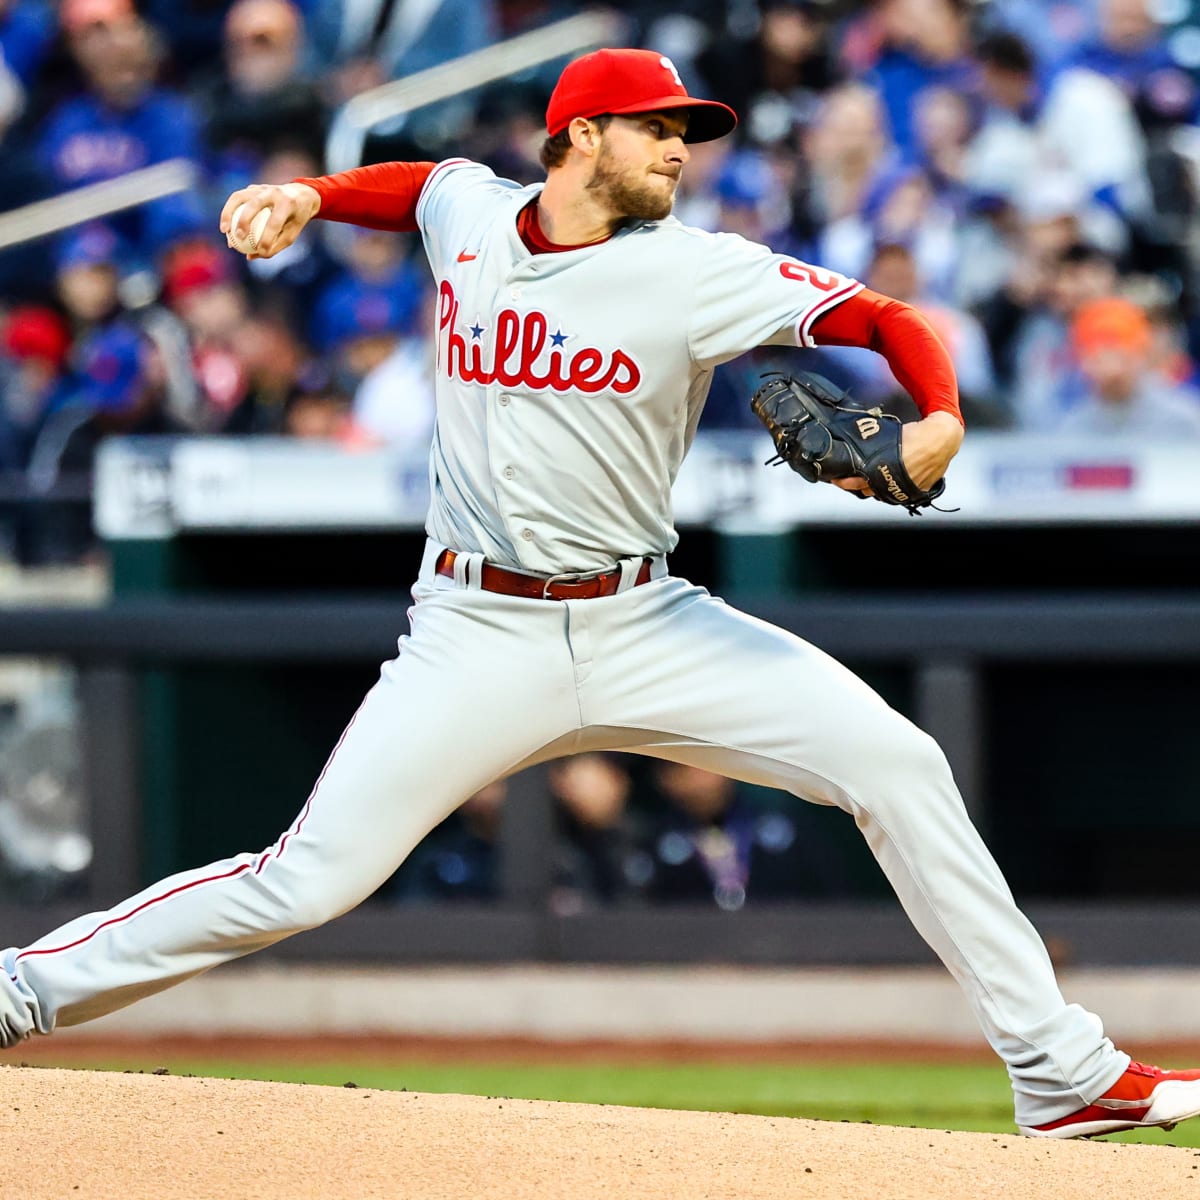 Aaron Nola brings ace stuff to pitch Phillies past Rays – Trentonian